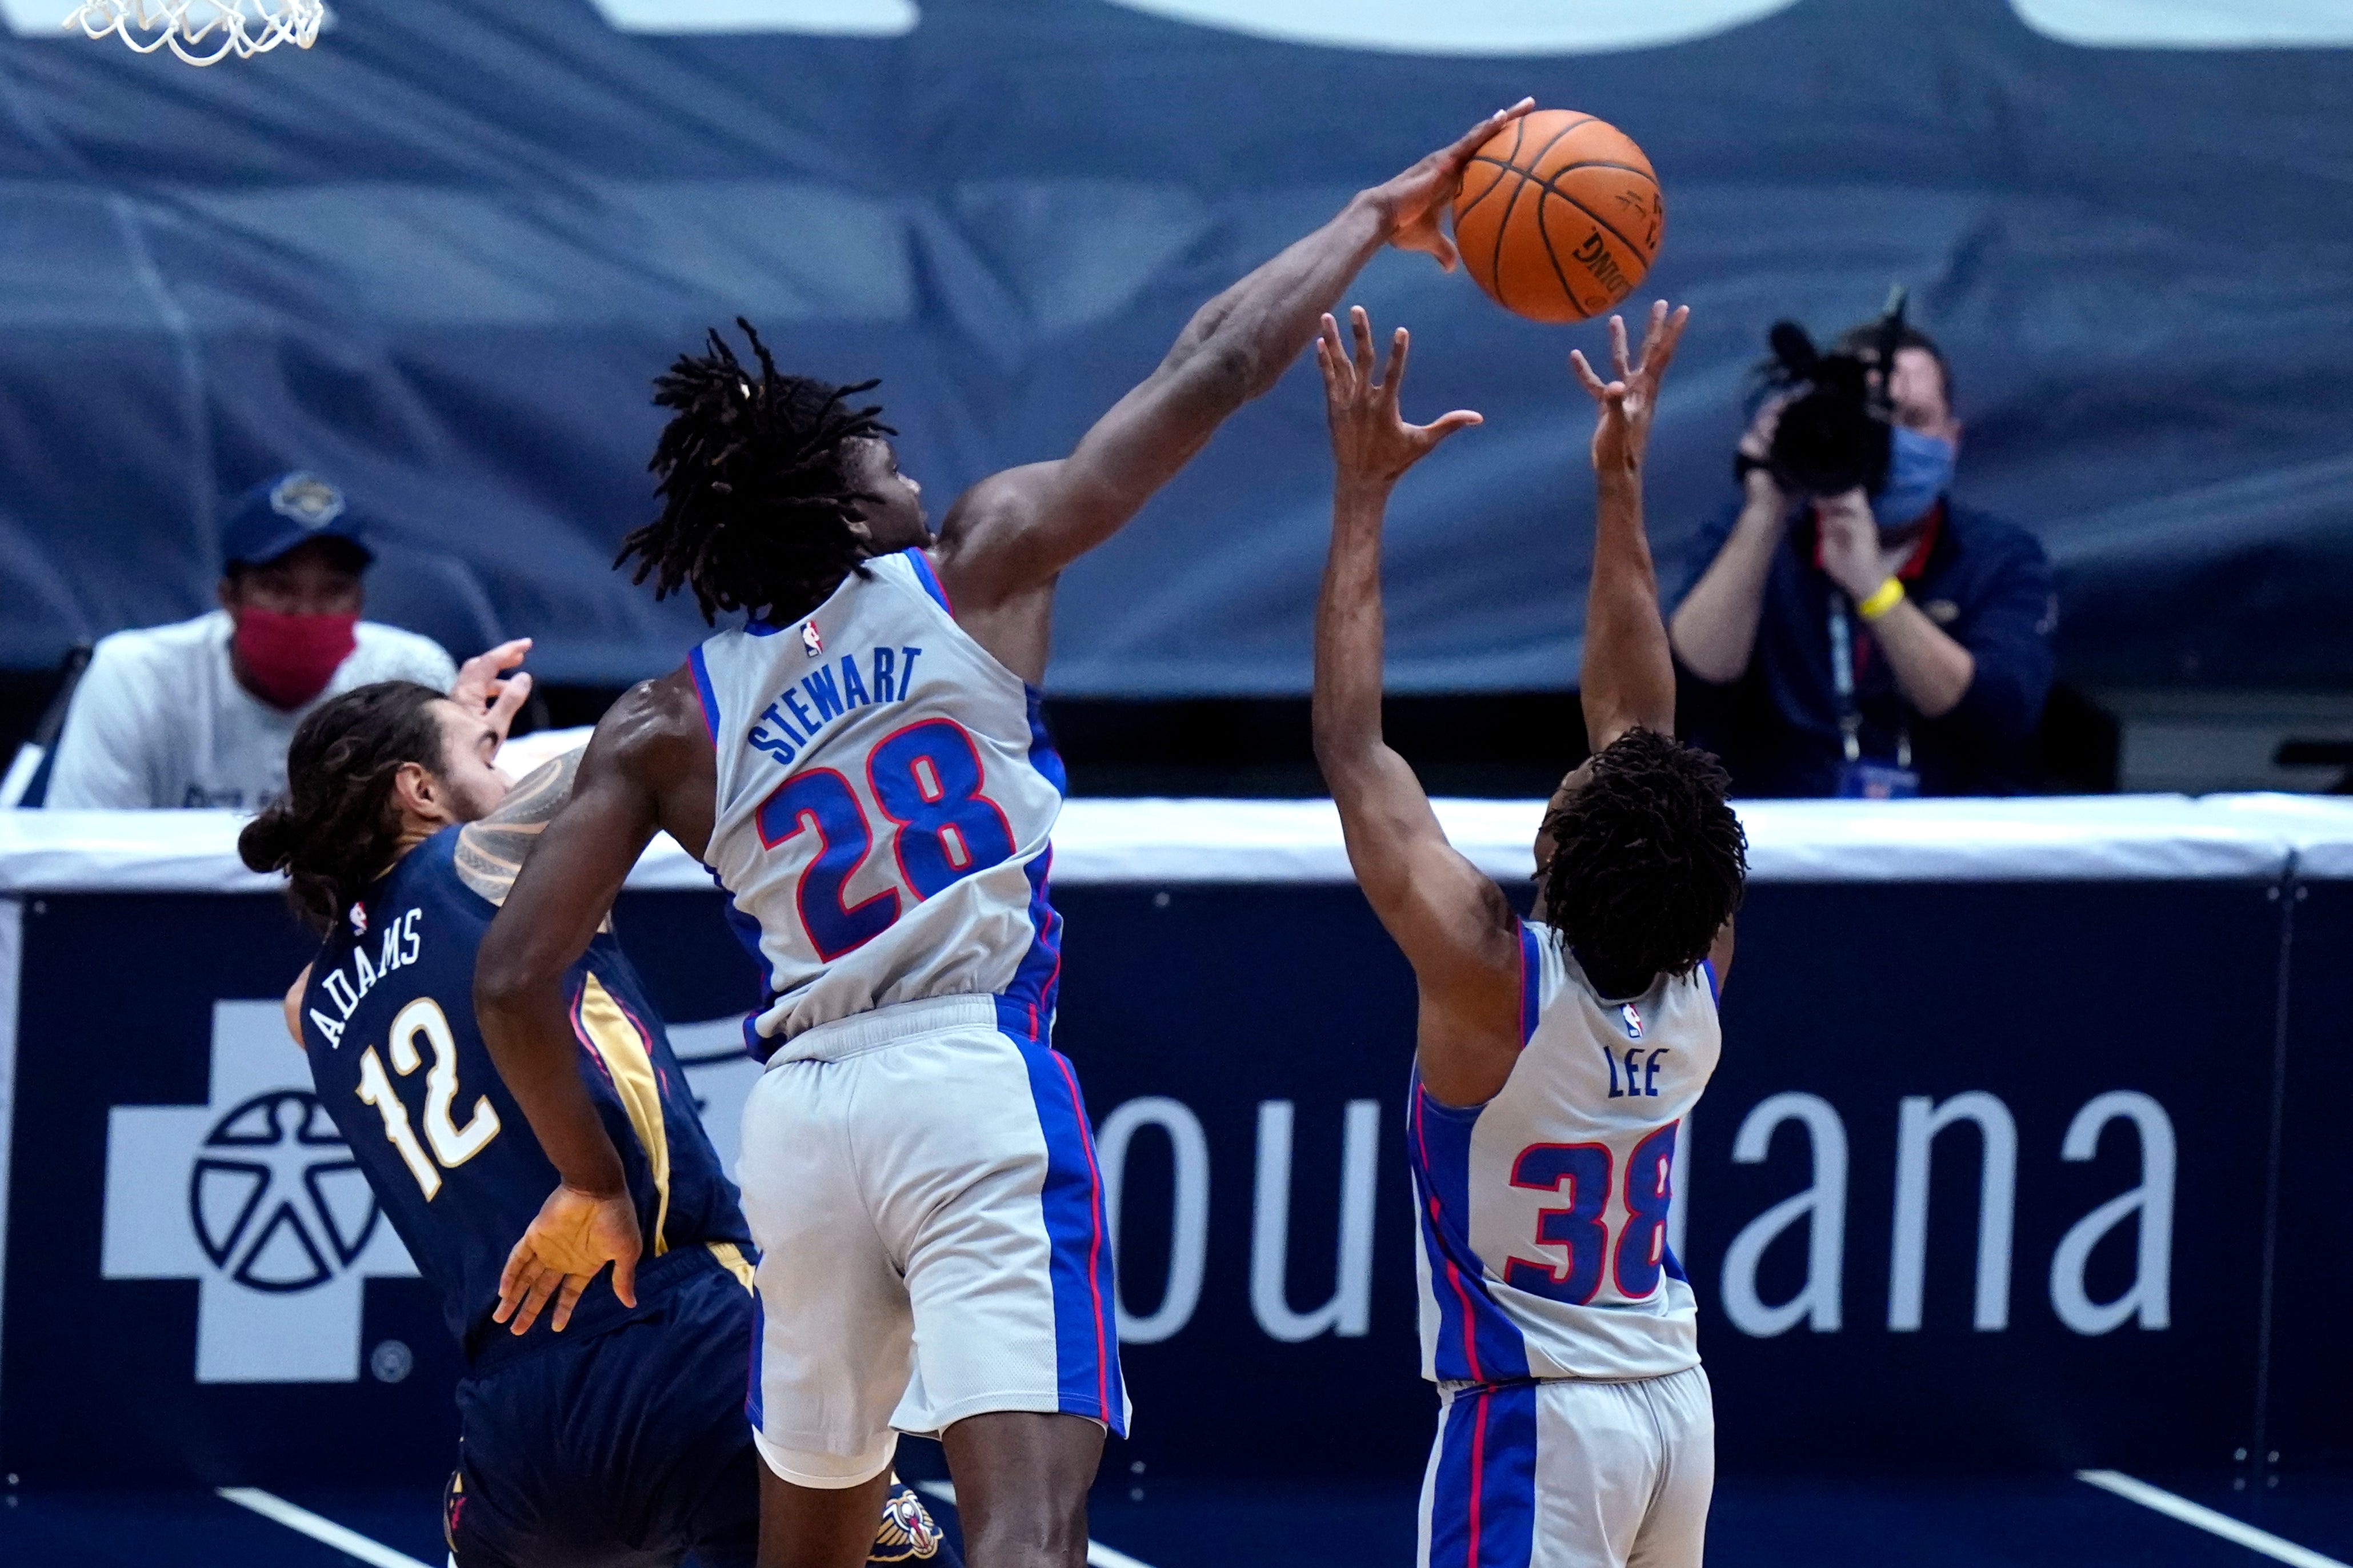 Detroit Pistons center Isaiah Stewart (28) and guard Saben Lee (38) and New Orleans Pelicans center Steven Adams (12) look for a rebound during the first half of an NBA basketball game in New Orleans, Wednesday, Feb. 24, 2021.